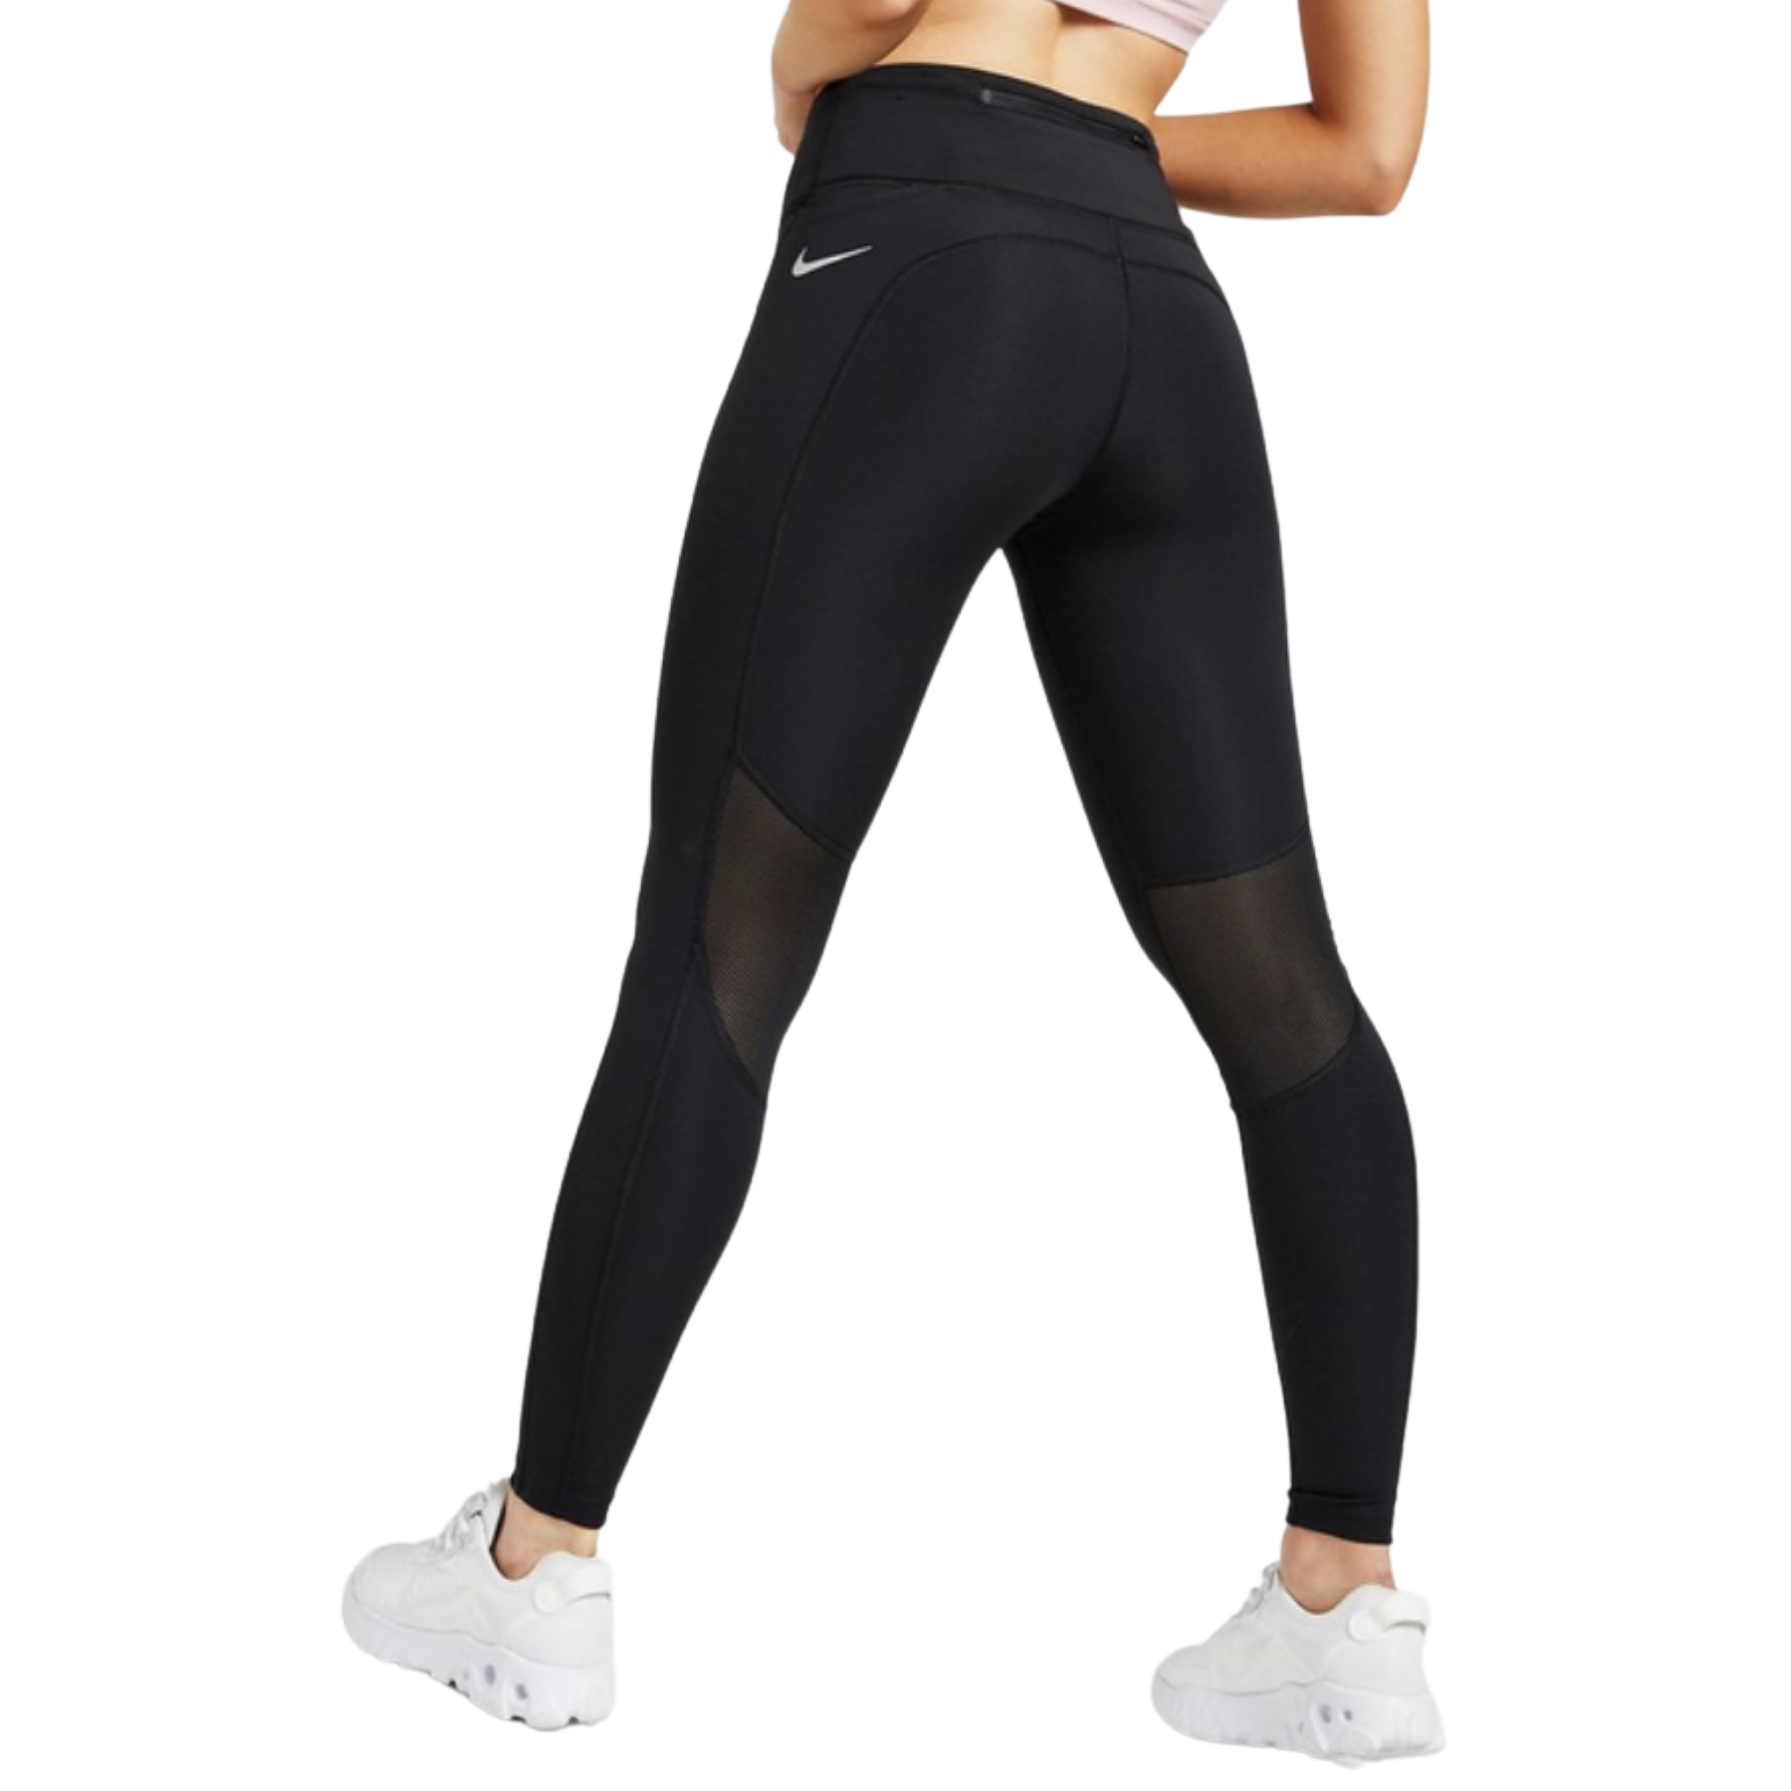 The Bull Runner Nike Tight Night: Nike launches its New Tights for Women -  The Bull Runner